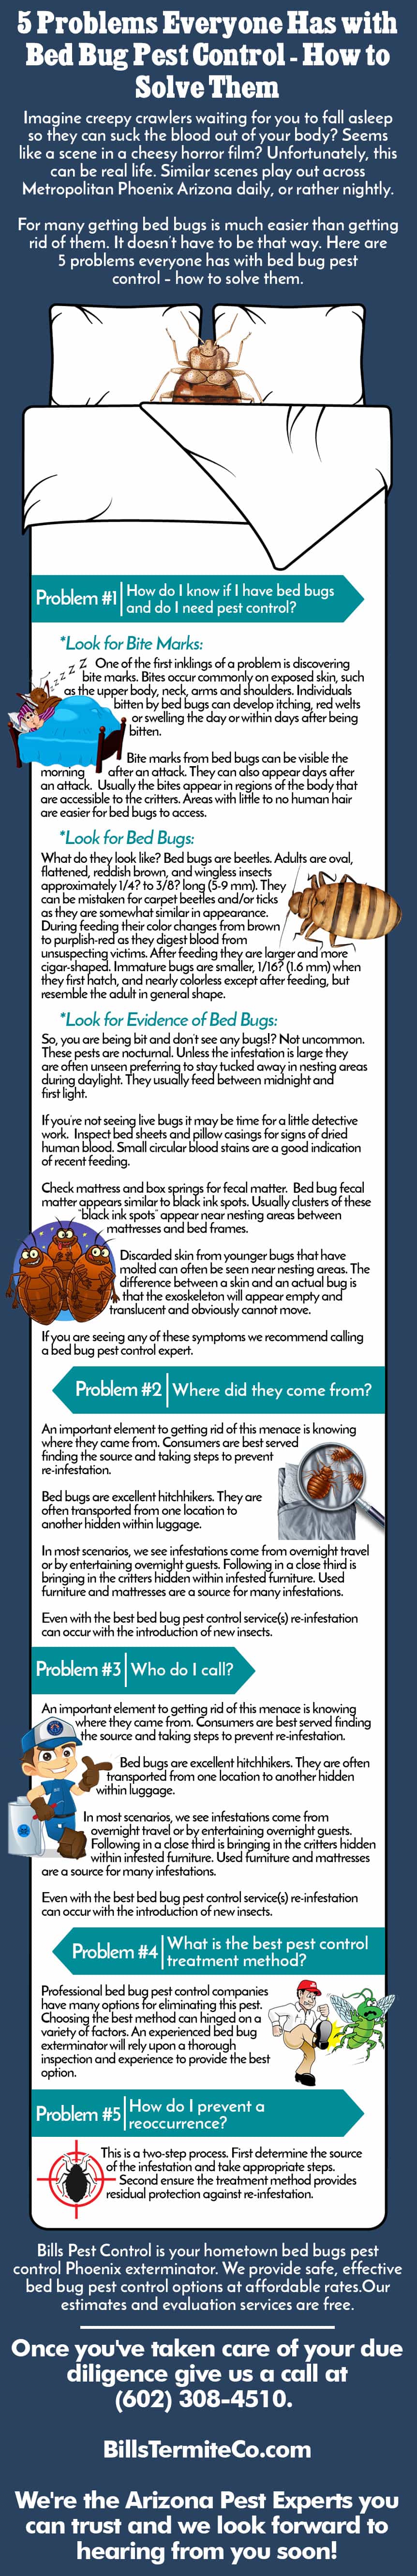 infographic-155-5-problems-everyone-has-with-bed-bug-pest-control